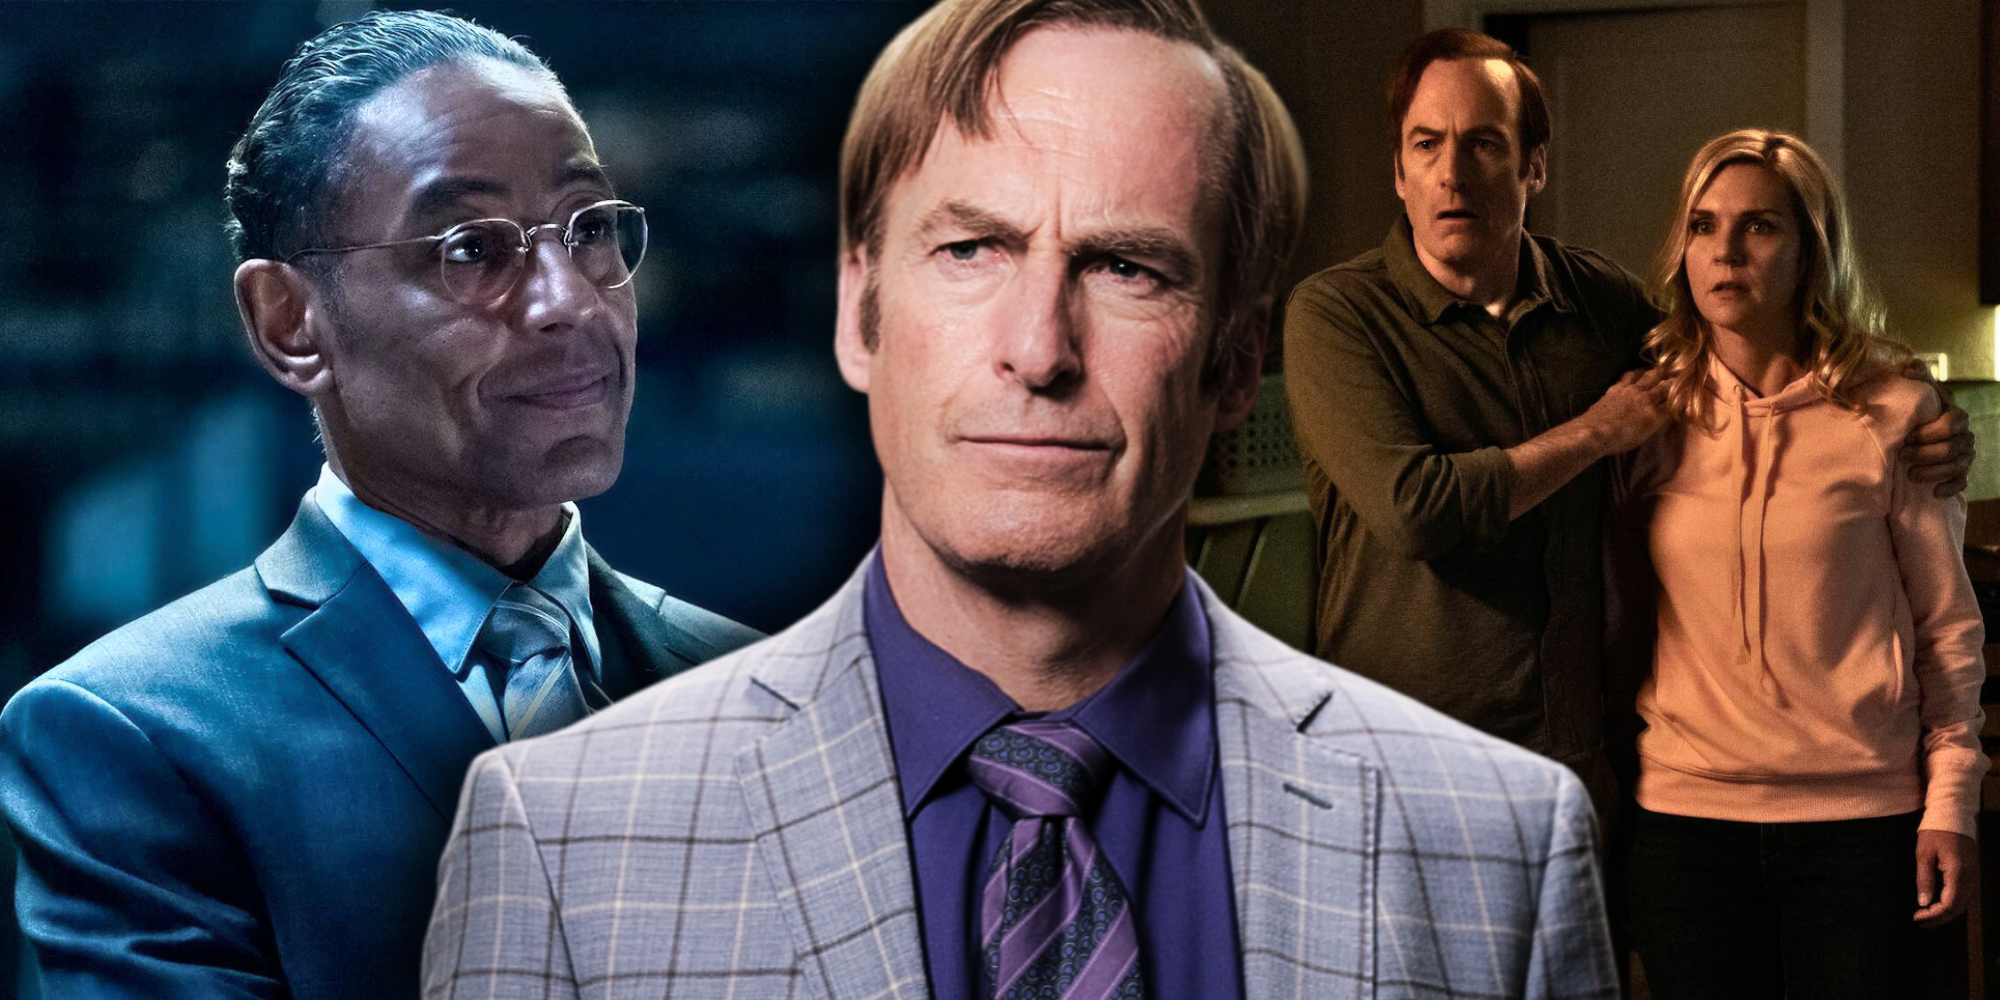 Gus Fring, Saul Goodman, and Kim Wexler in Better Call Saul